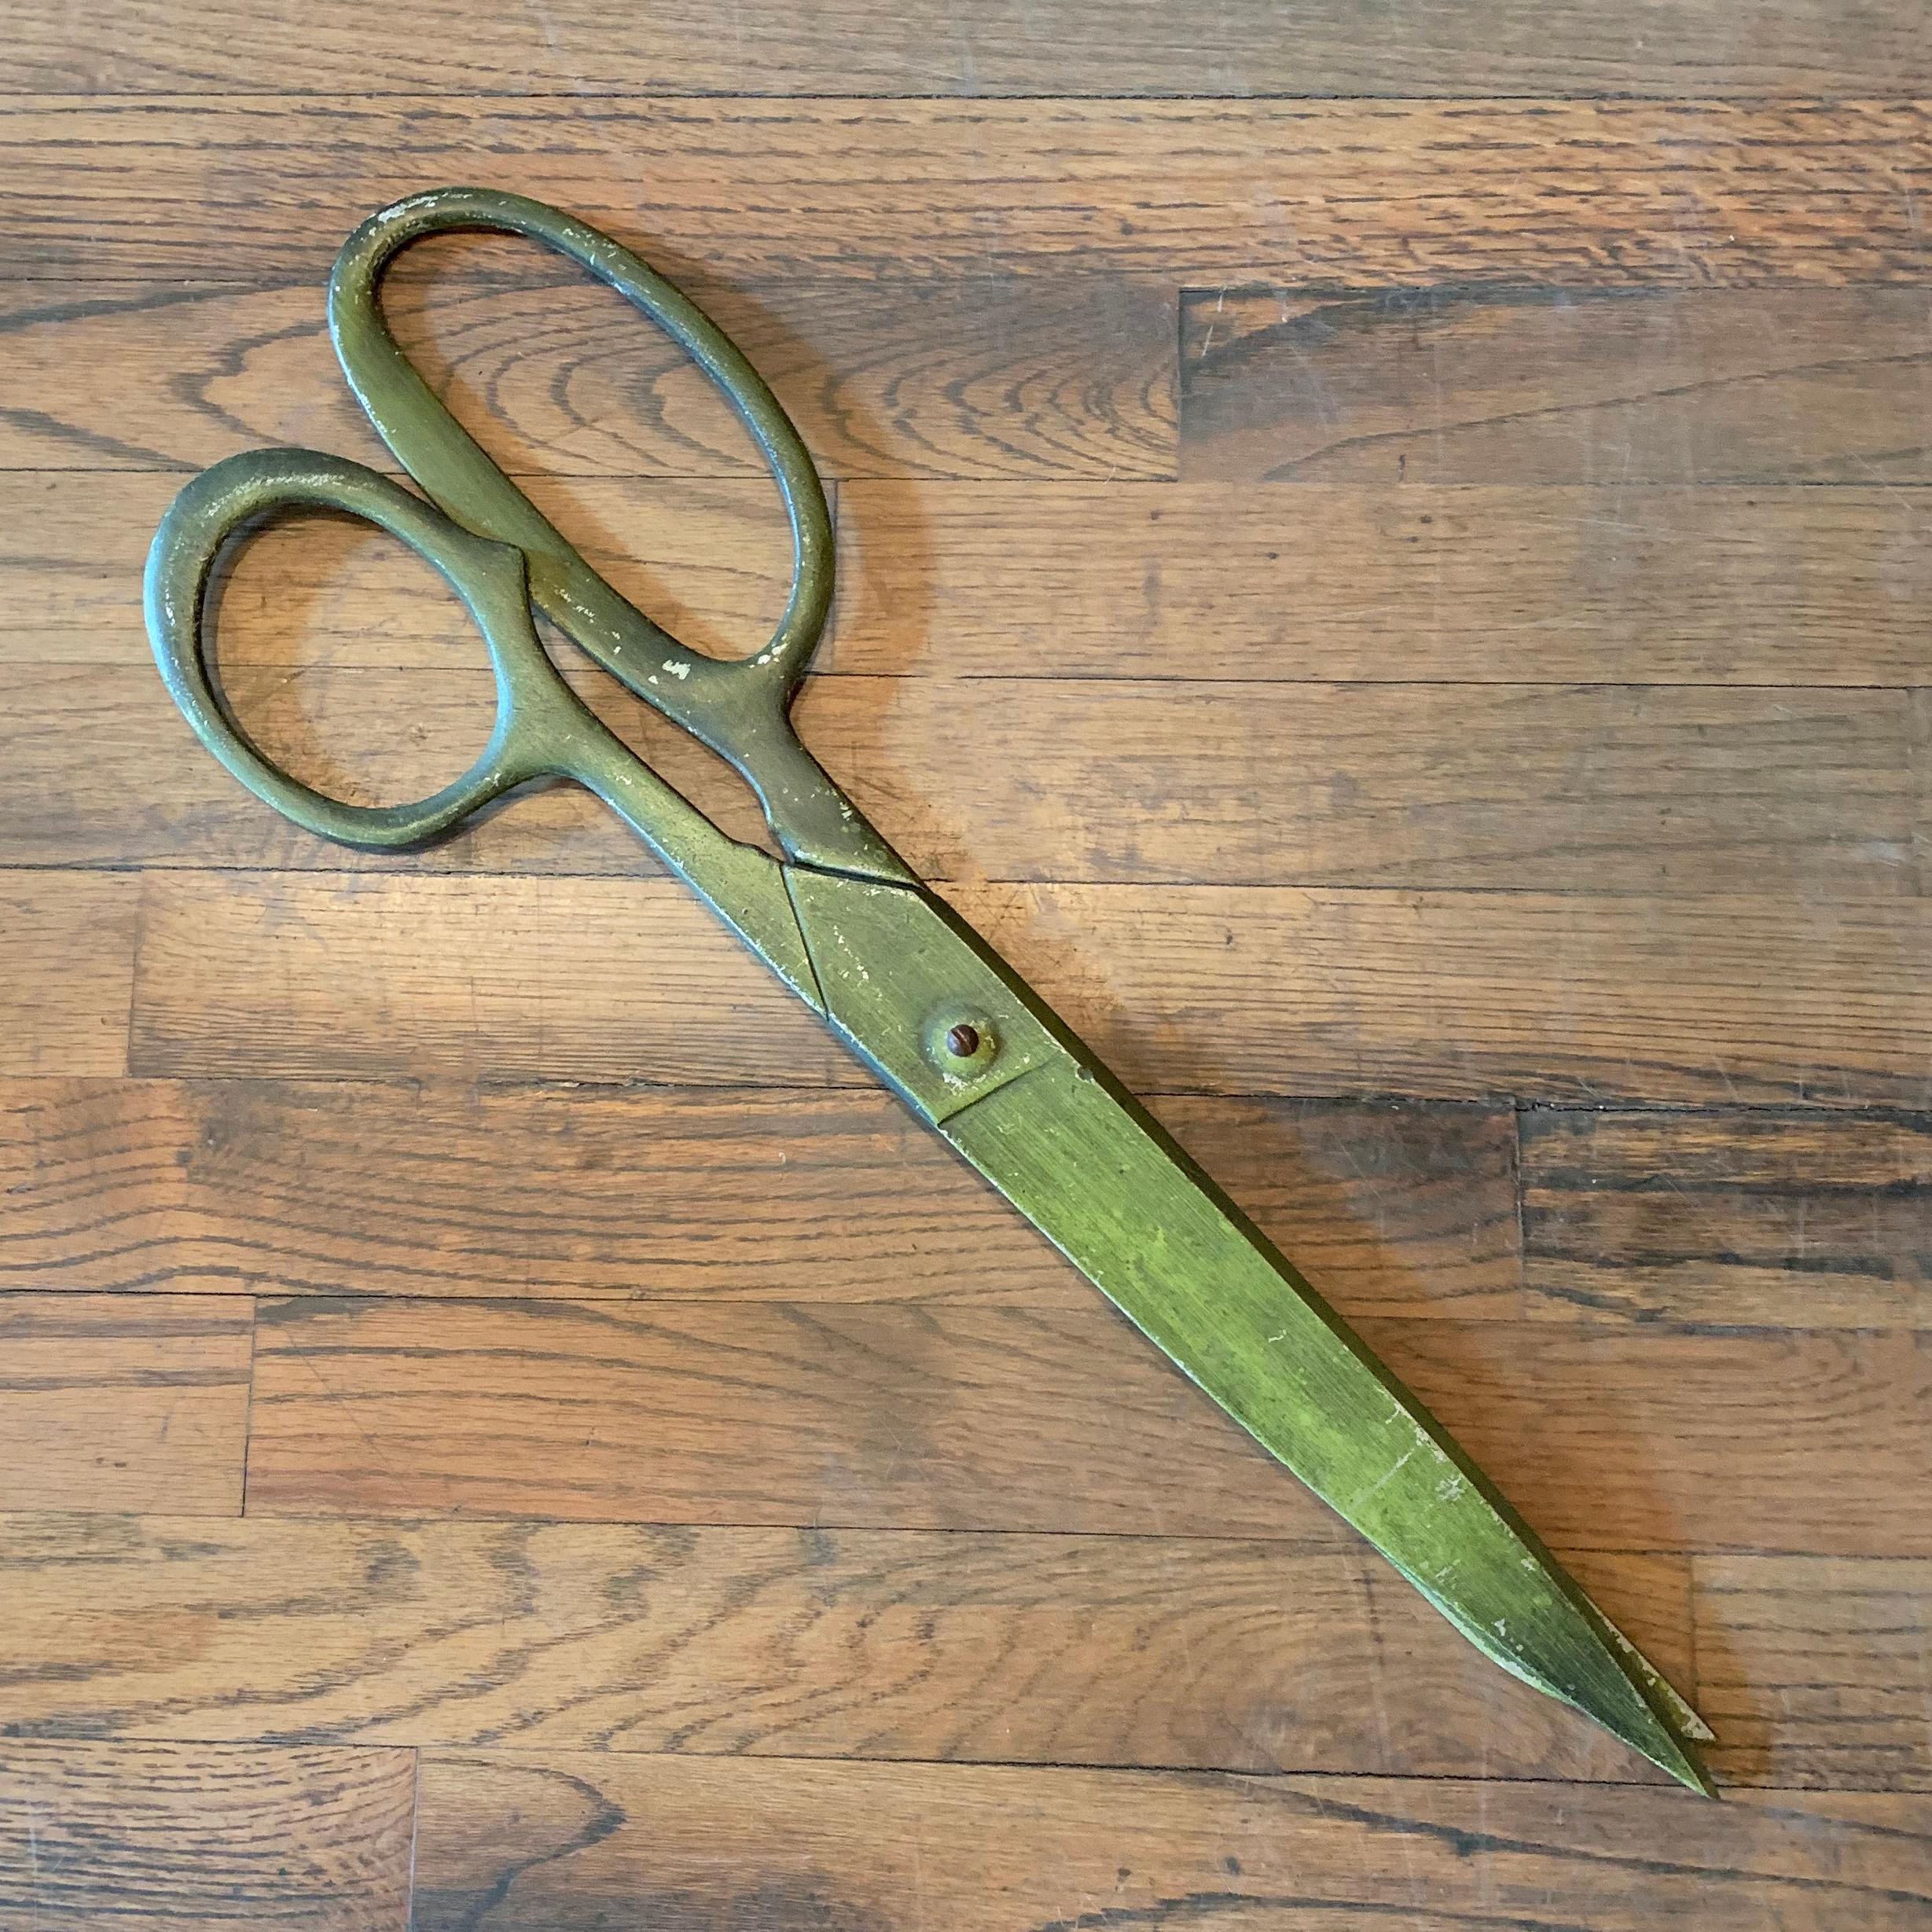 Midcentury, oversized, advertising, store display, painted aluminum scissors open and close as real scissors. Makes a great, rustic, folk art piece or wall art.